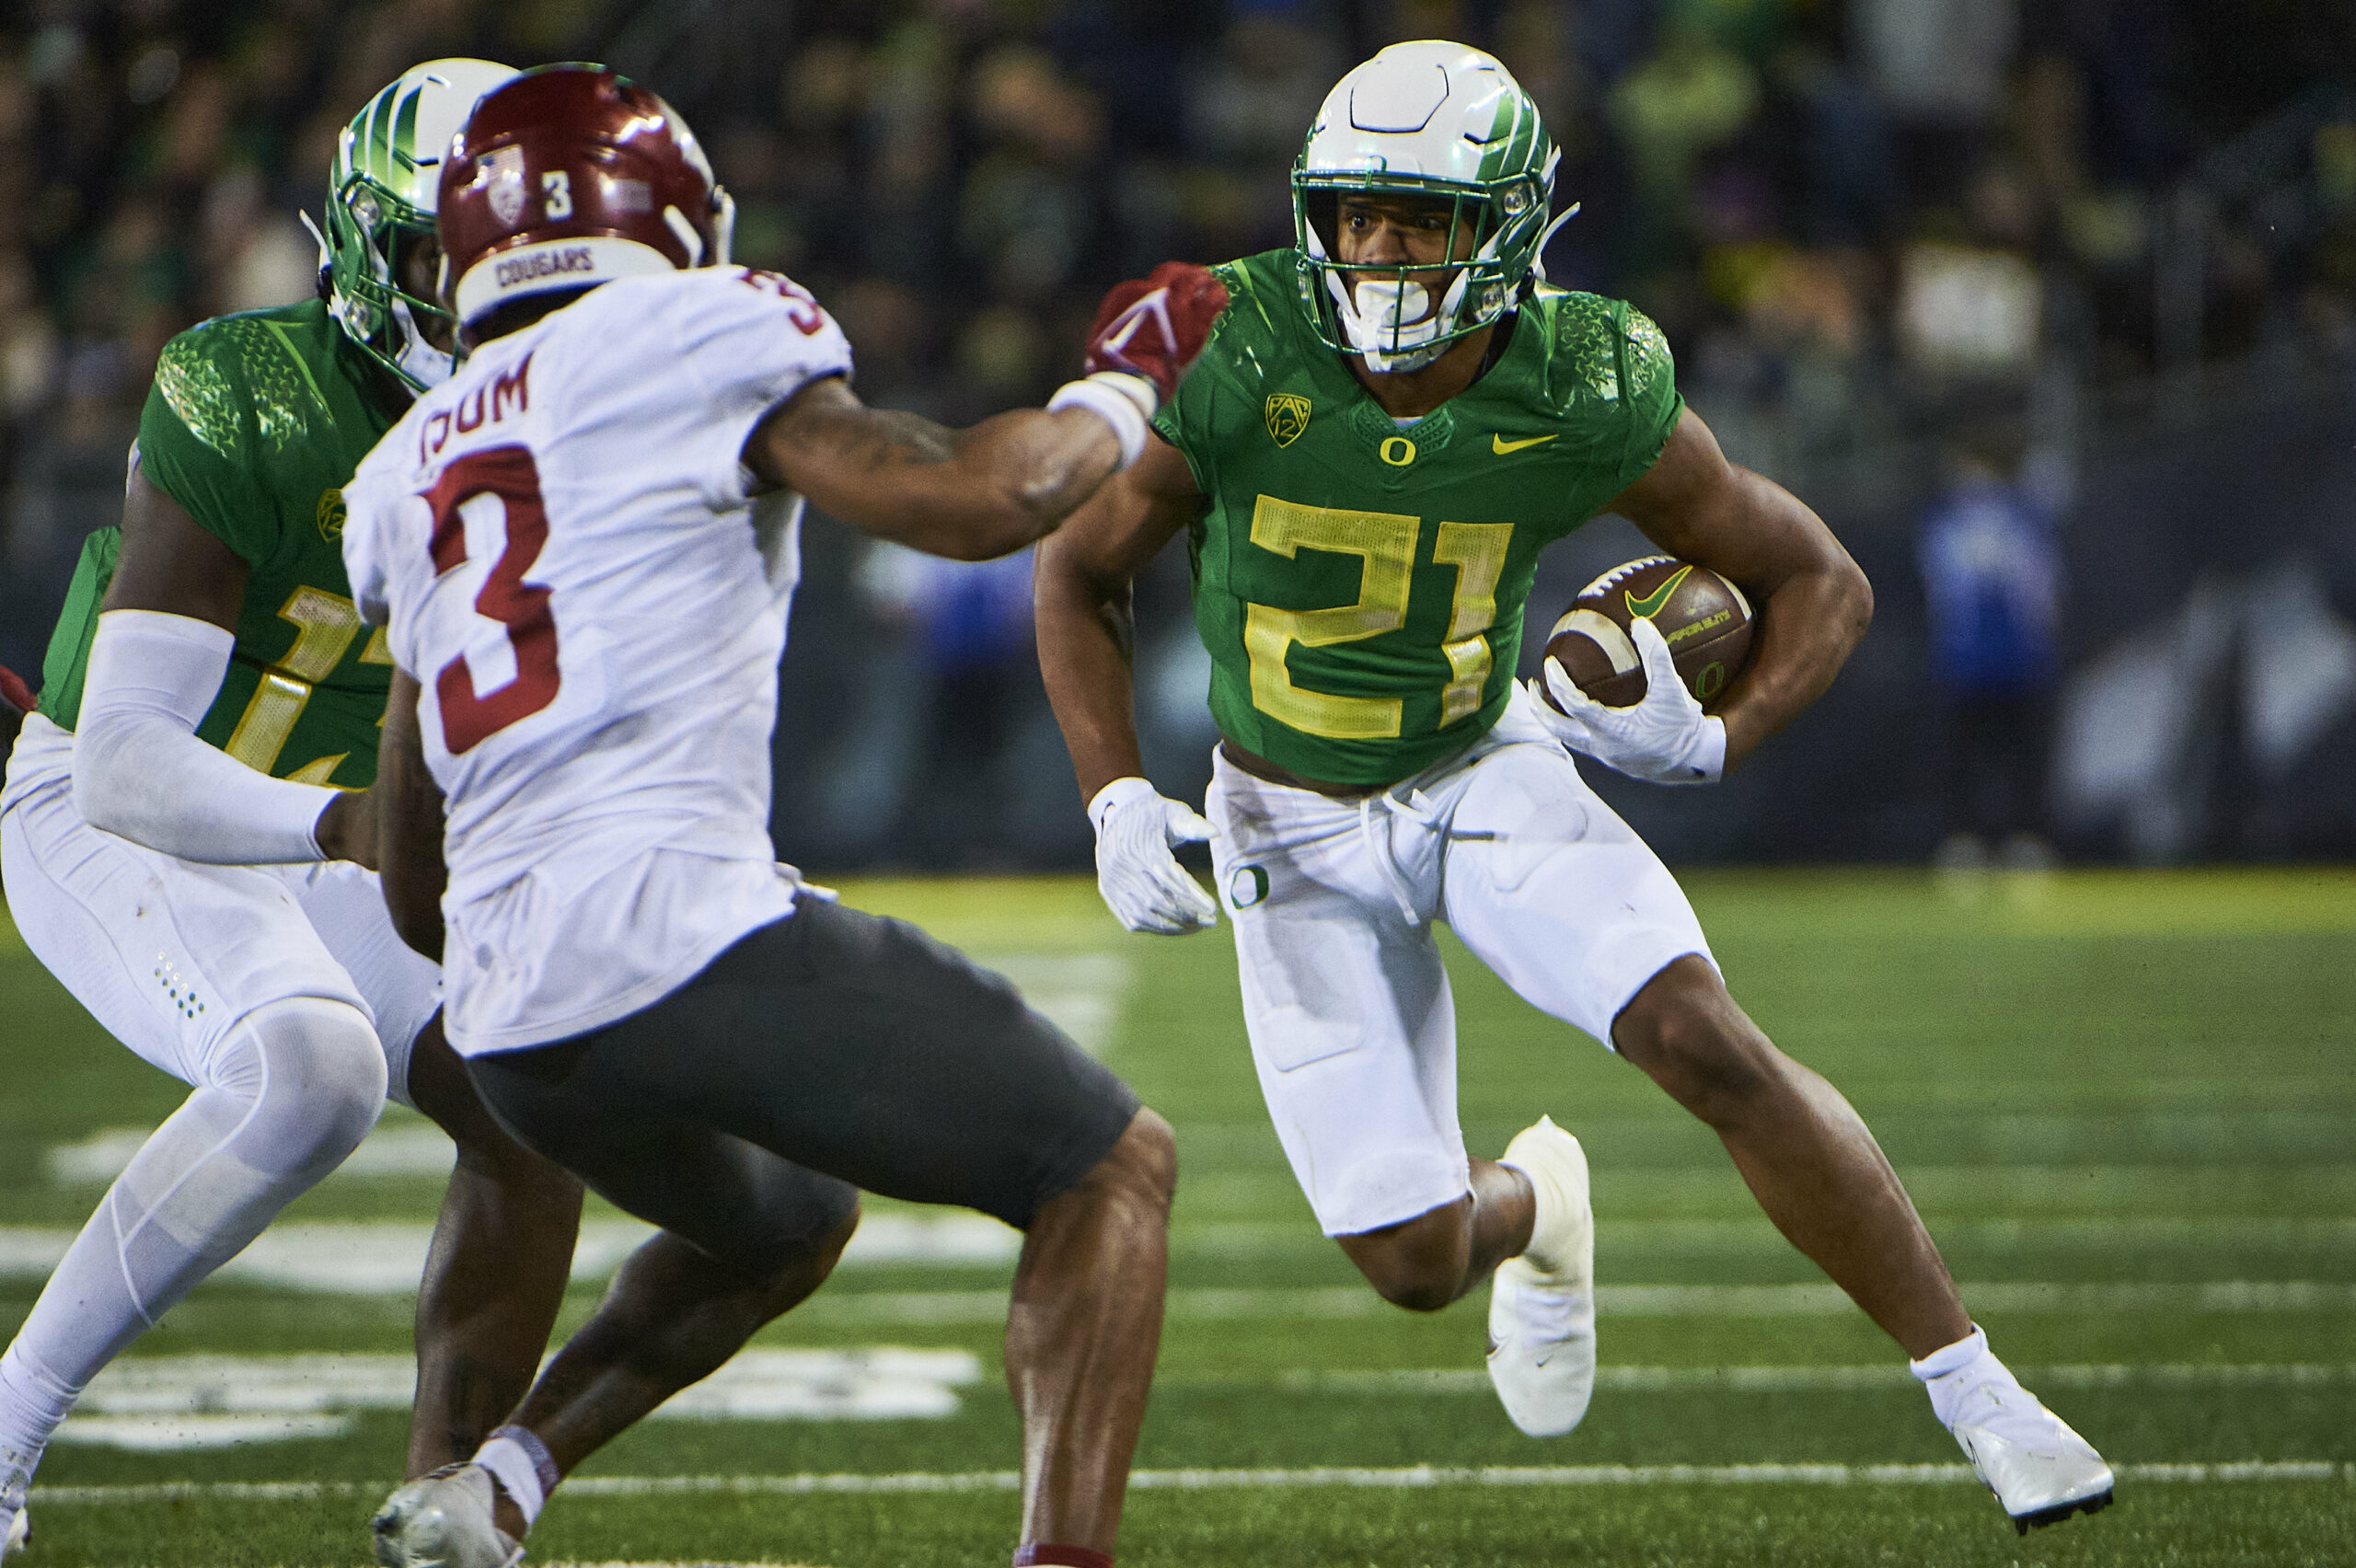 Oregon vs. Washington State, live stream, preview, TV channel, time, how to watch college football